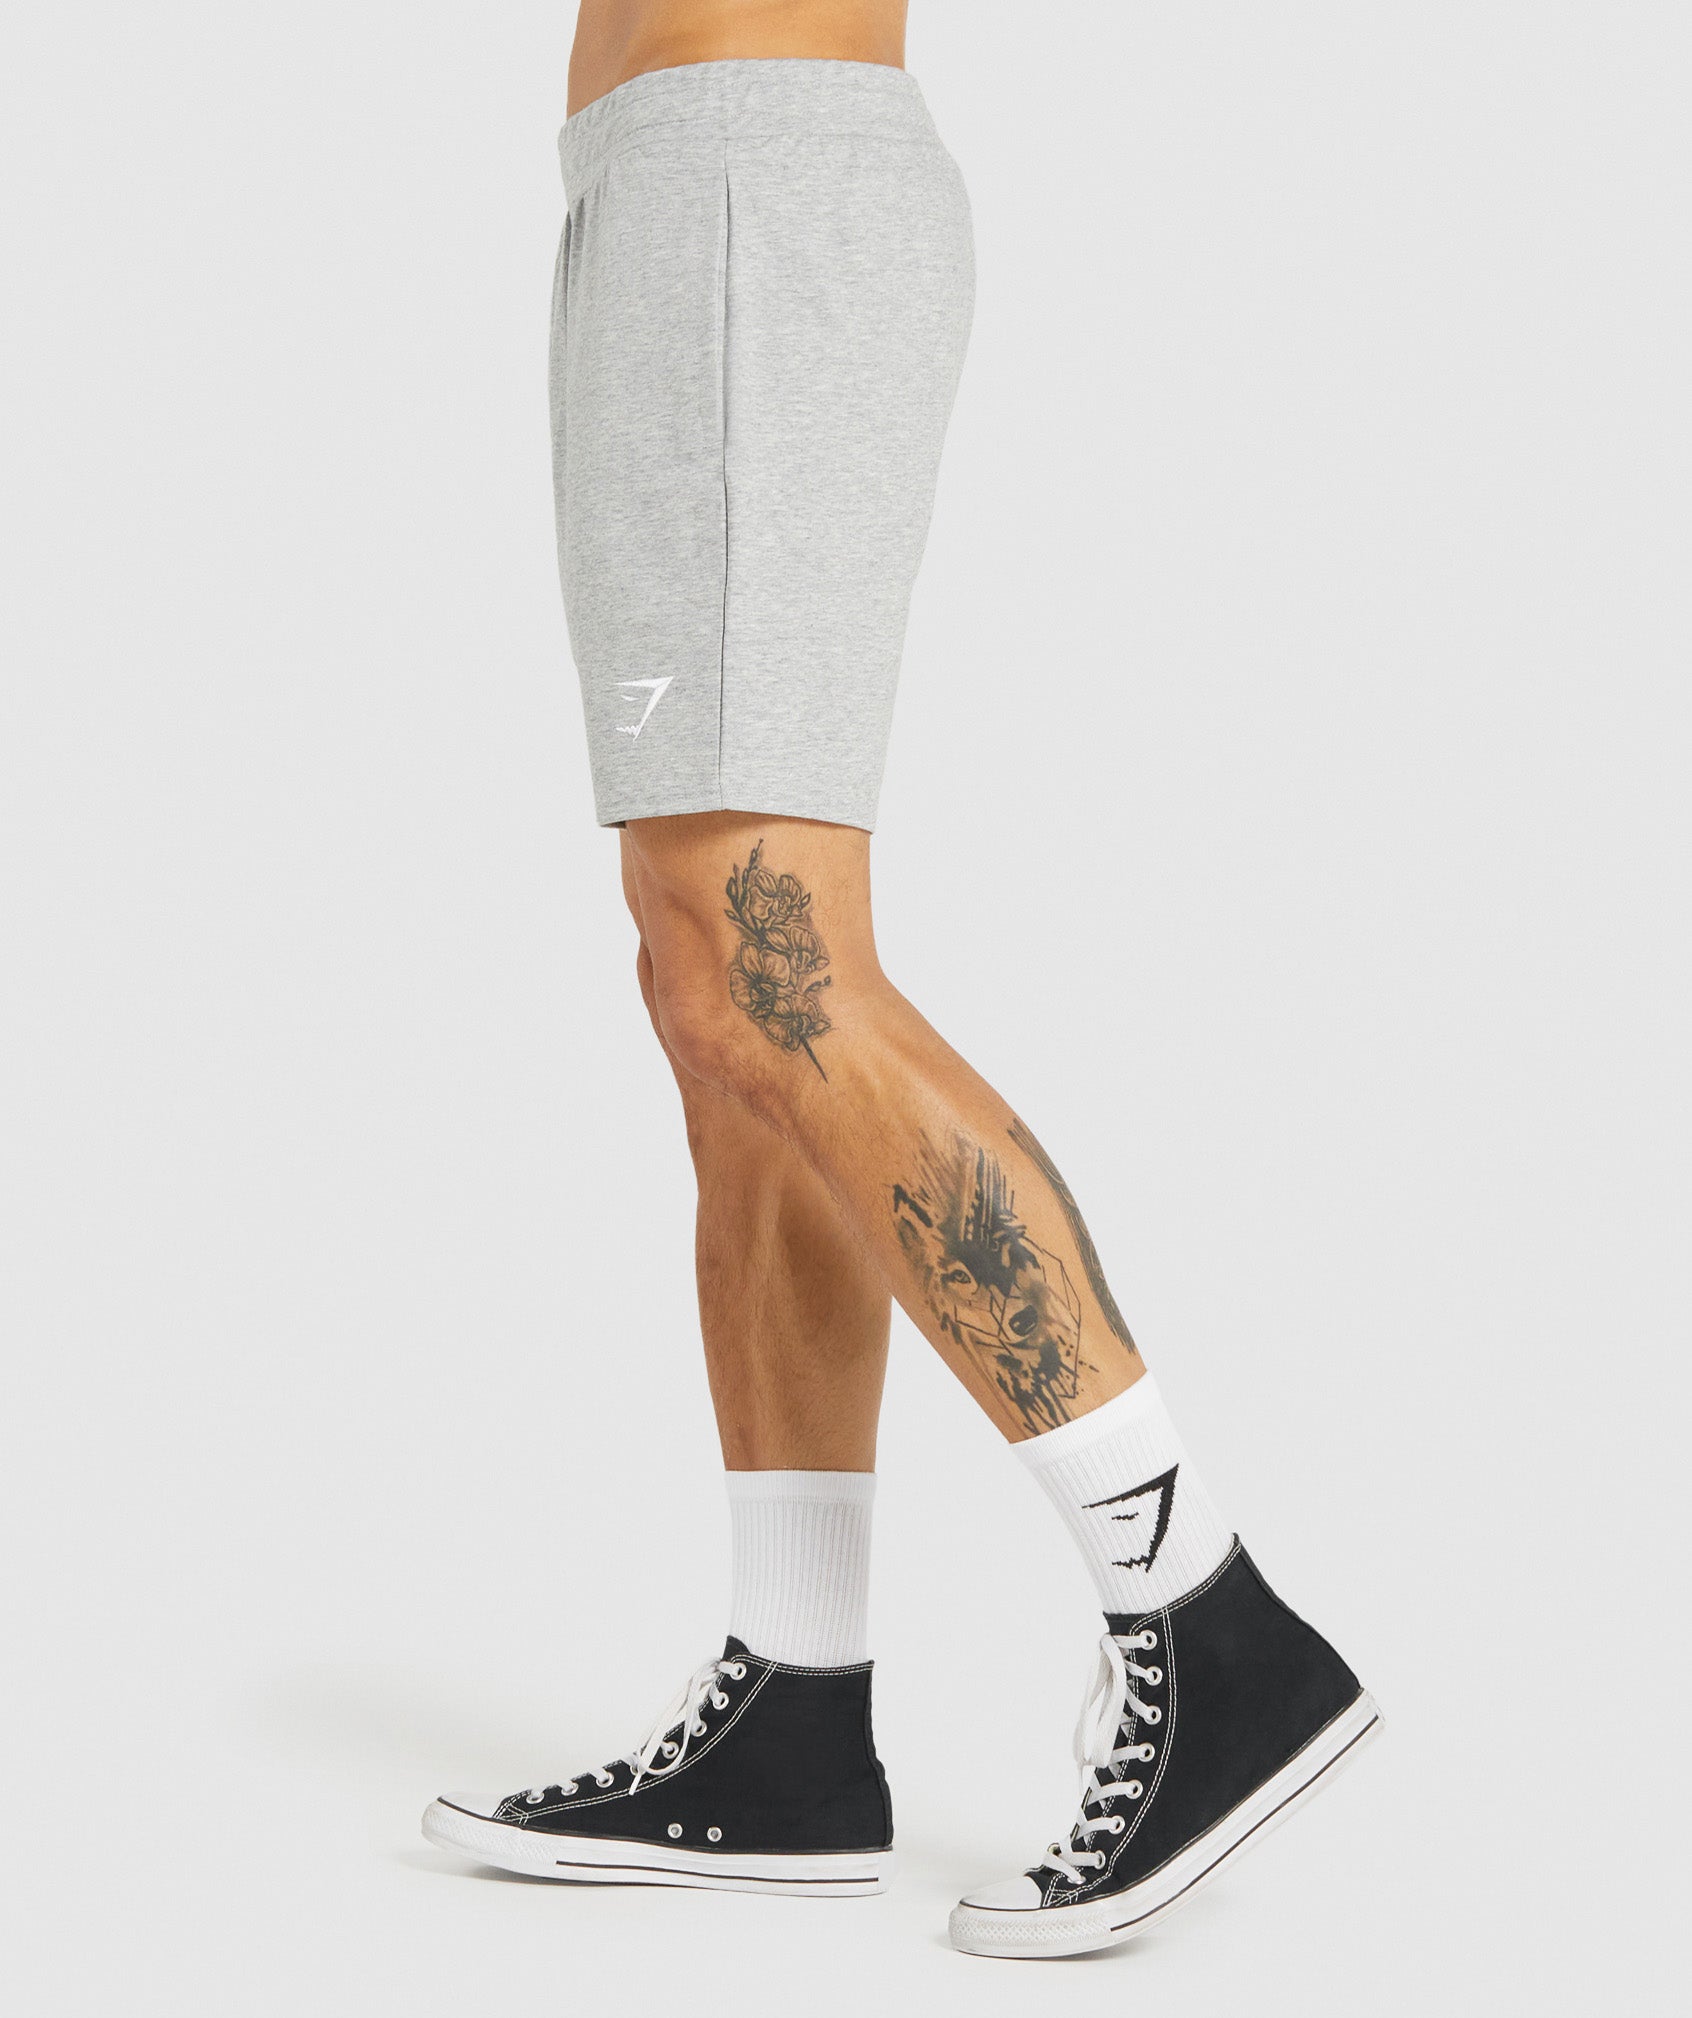 Essential 7” Shorts in Light Grey Marl - view 3